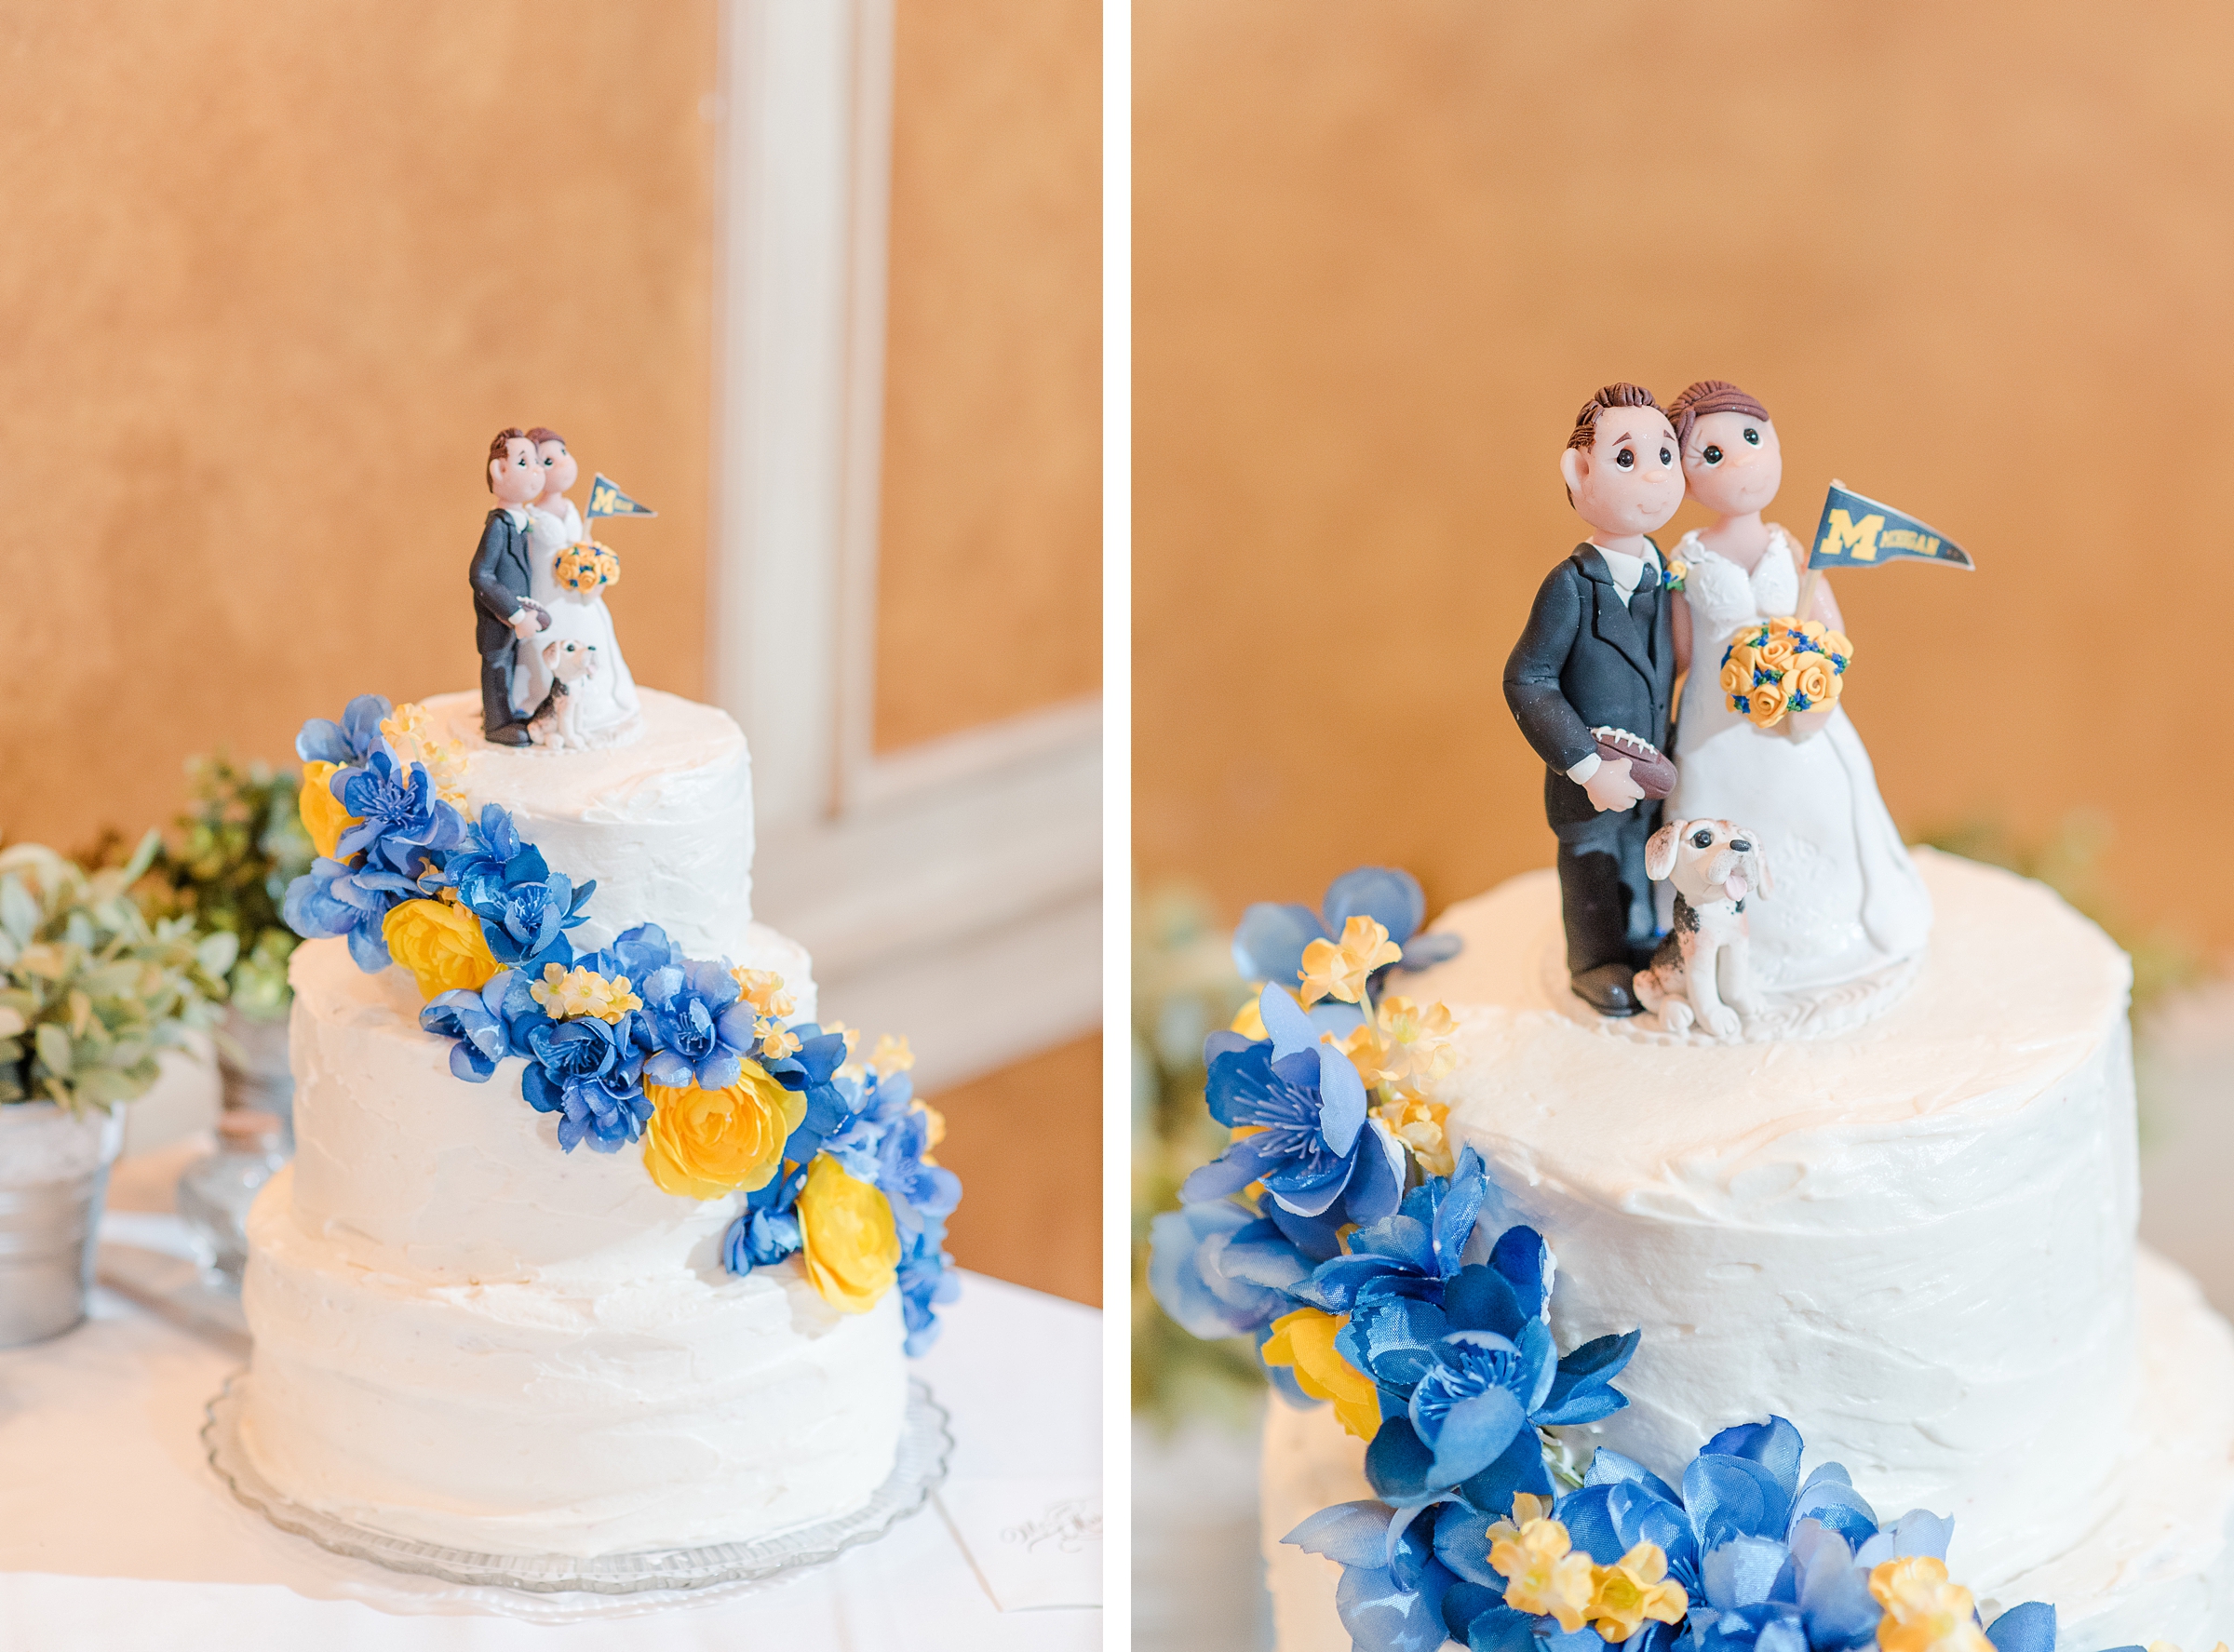 Reception cake by Virginia Wedding photographer Kailey Brianne Photography 